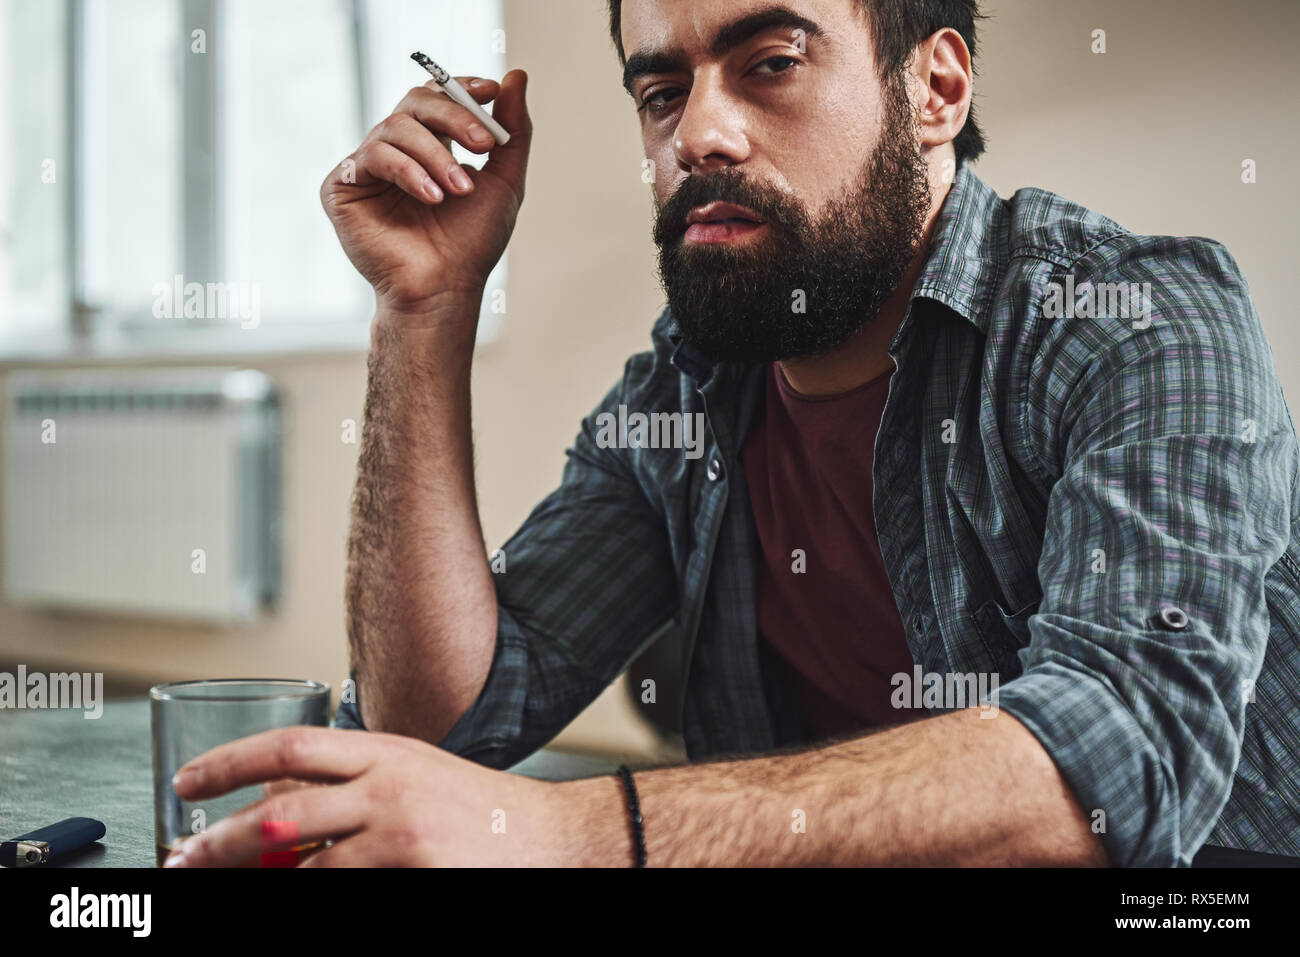 Cropped image of dark-haired, sad and wasted alcoholic man sitting at the table, in the kitchen, smoking and drinking whiskey, holding glass and cigar Stock Photo